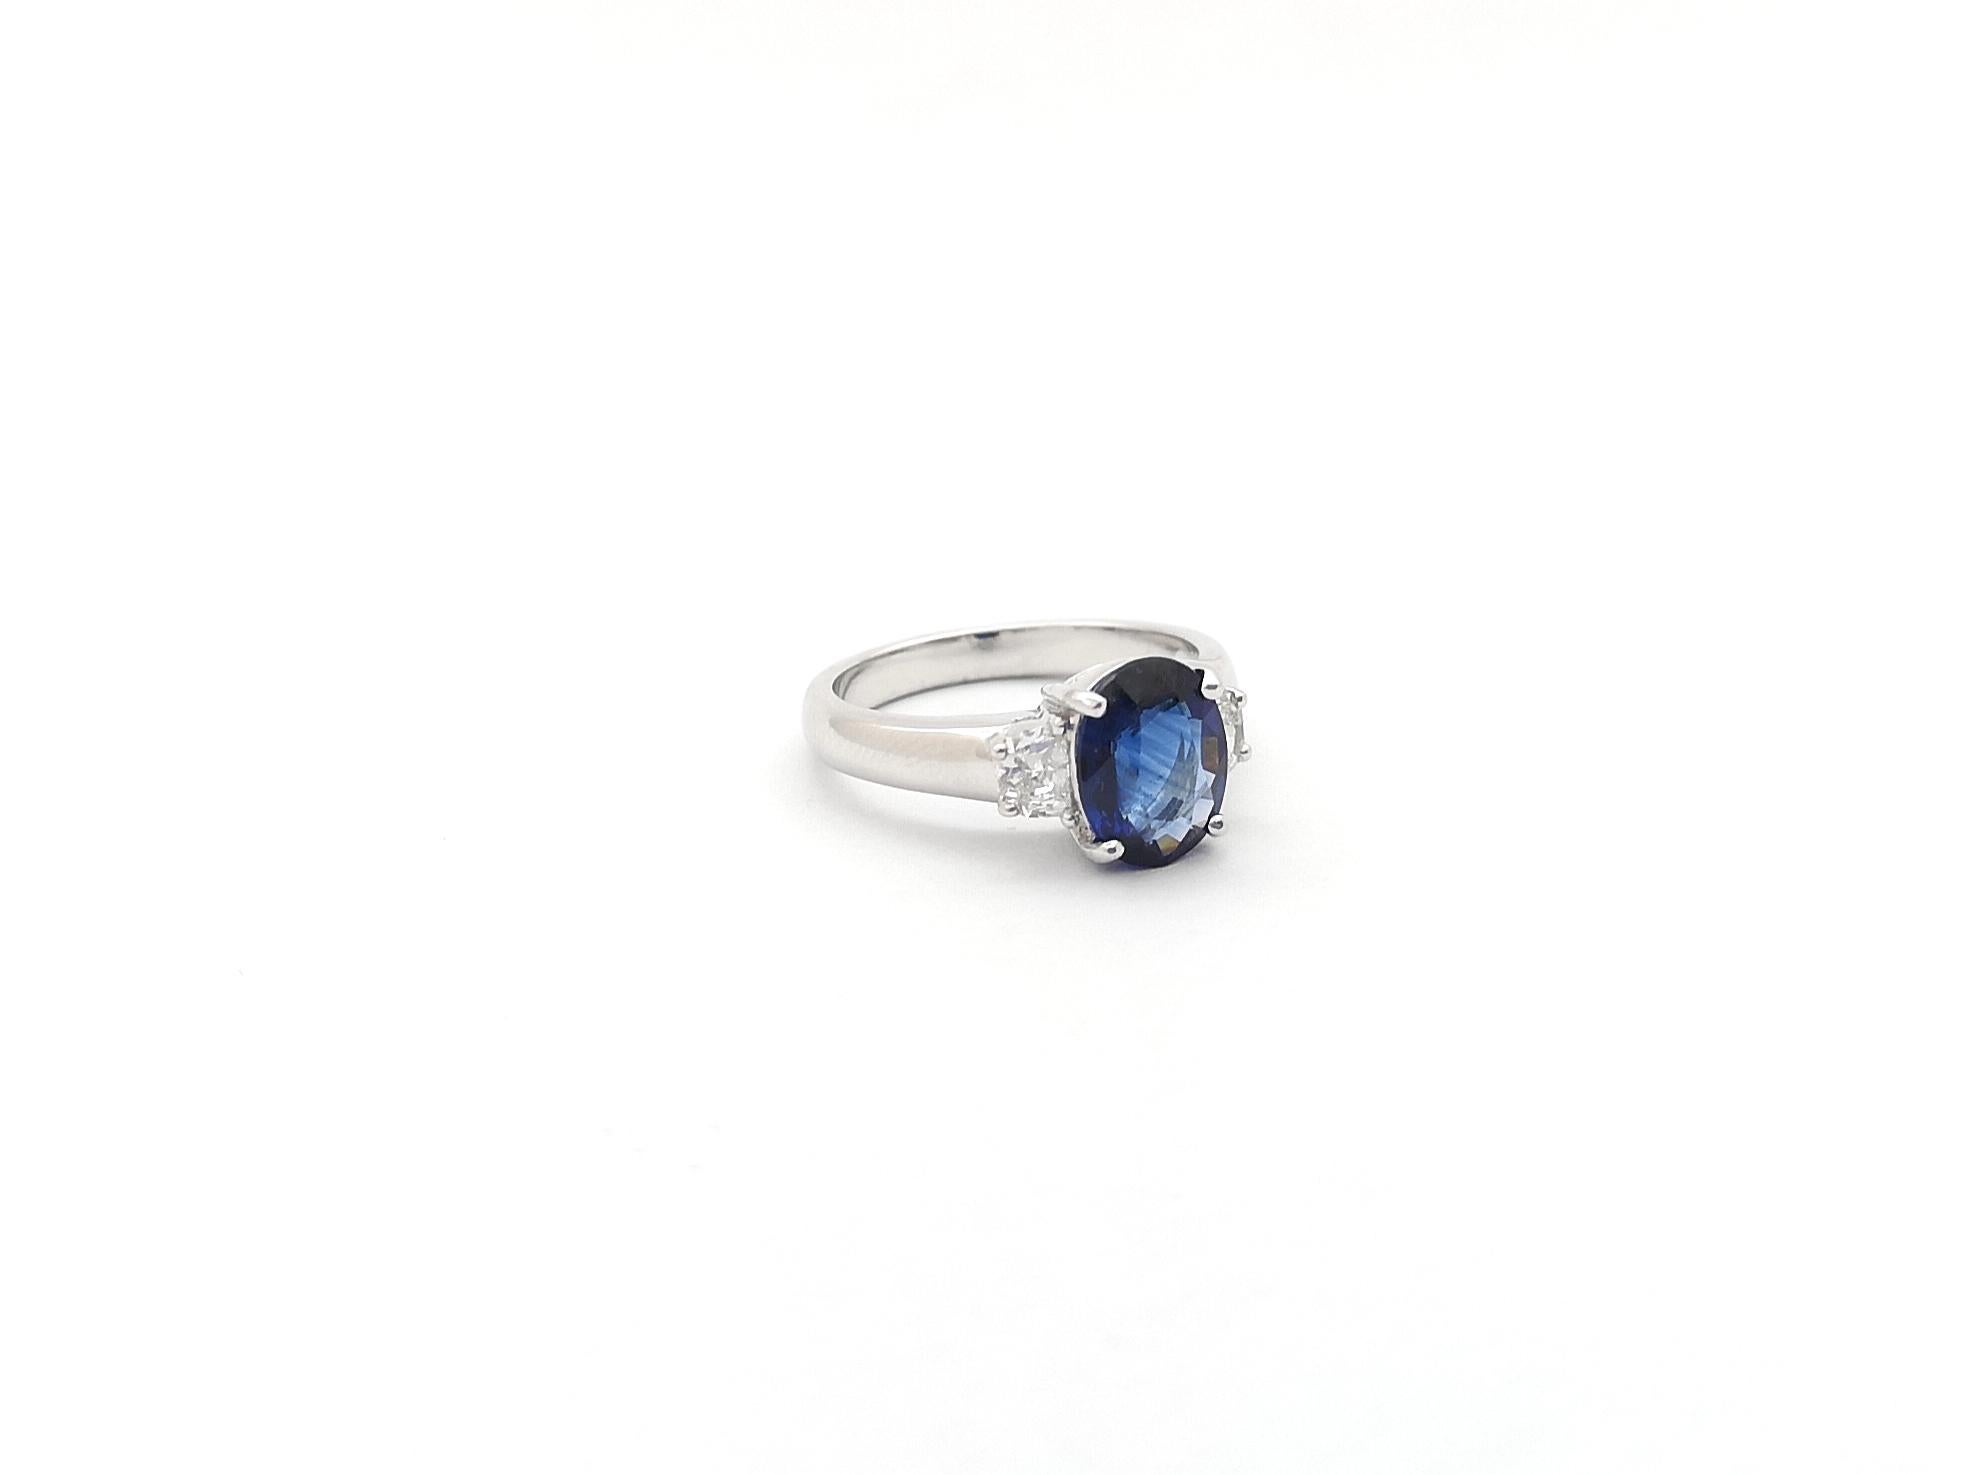 GIA Certified Blue Sapphire with Diamond Ring set in Platinum 950 Settings For Sale 5